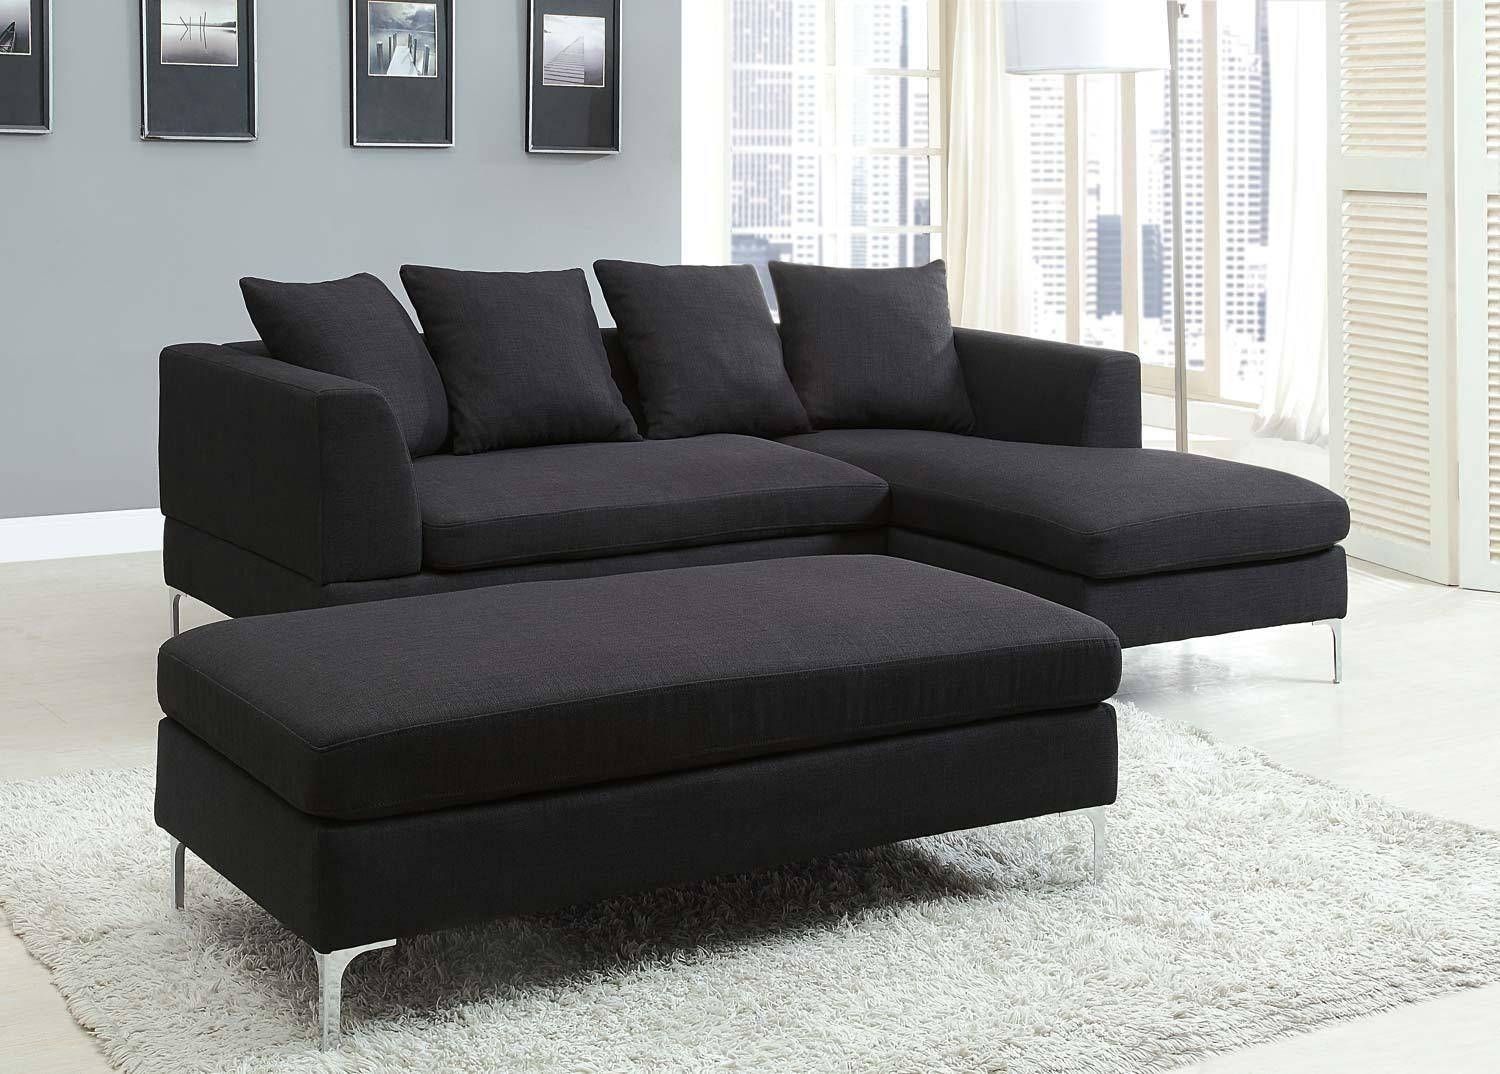 Sofas Center : Contemporary Leather Living Room Furniture Modern Inside Small Modular Sofas (View 10 of 25)